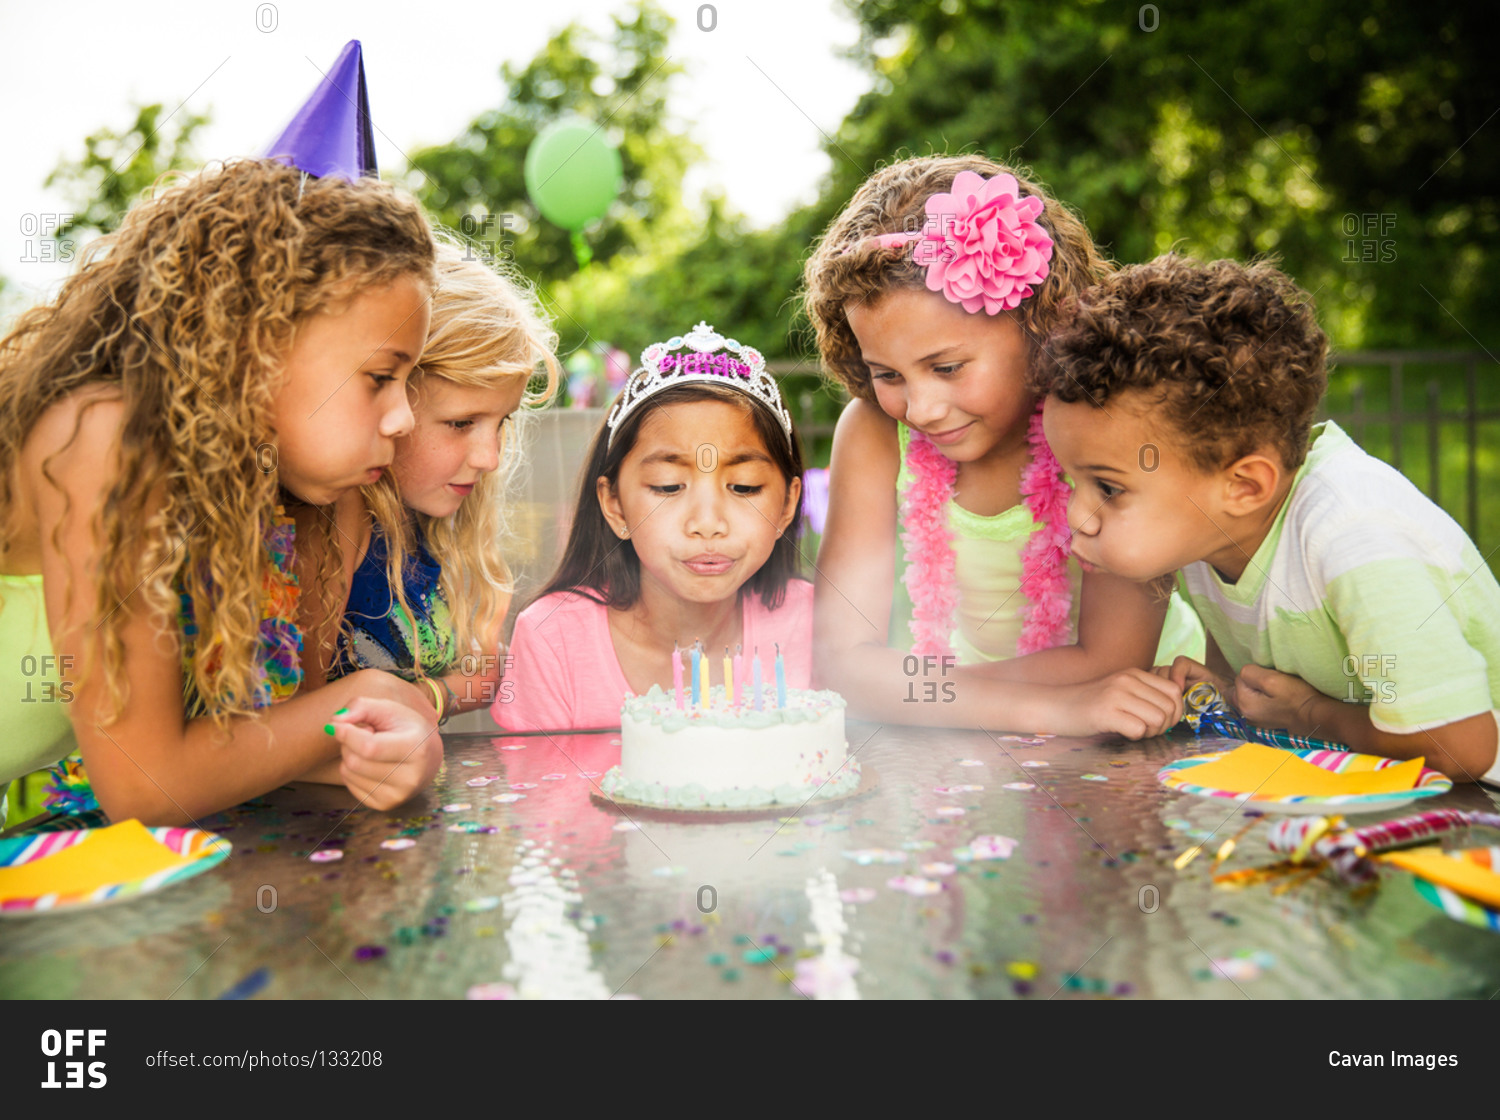 Children blowing out the candles on birthday cake together